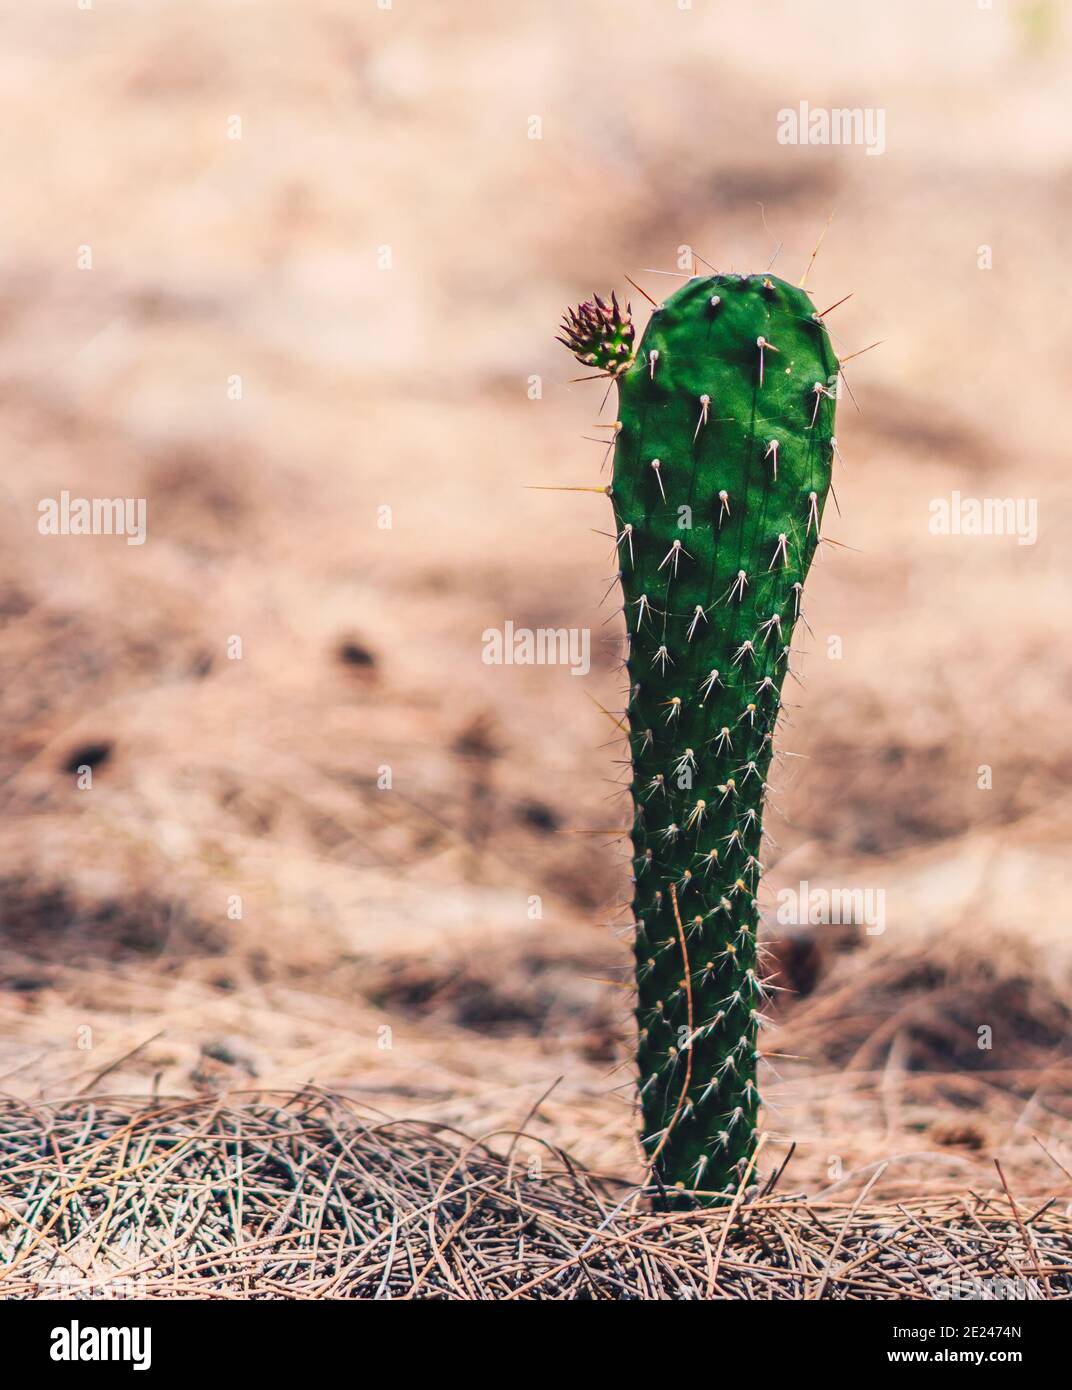 Close up green cactus plant, bud flower, spines. Symbol of loneliness, communication problems, hidden beauty of person introverted or bad character Stock Photo